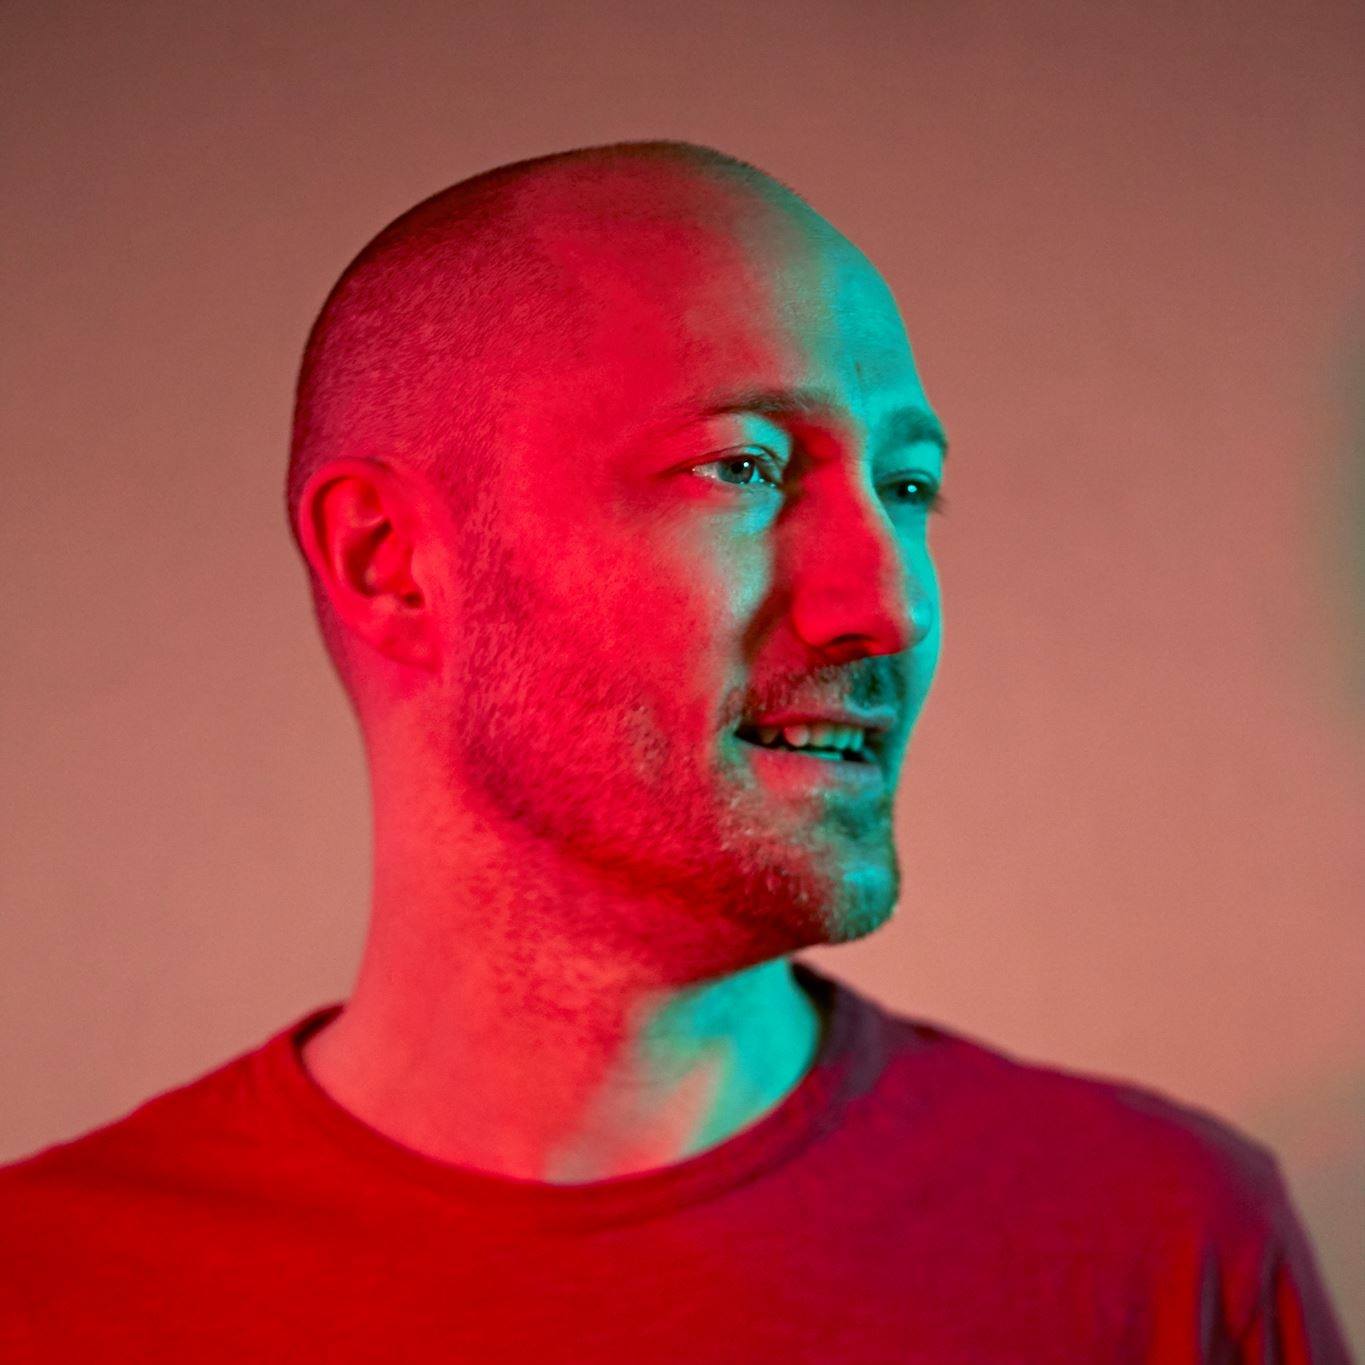 Electric Zoo 2017: Paul Kalkbrenner discusses why he went ‘Back to the Future’ [Interview]Paul Kalkbrenner